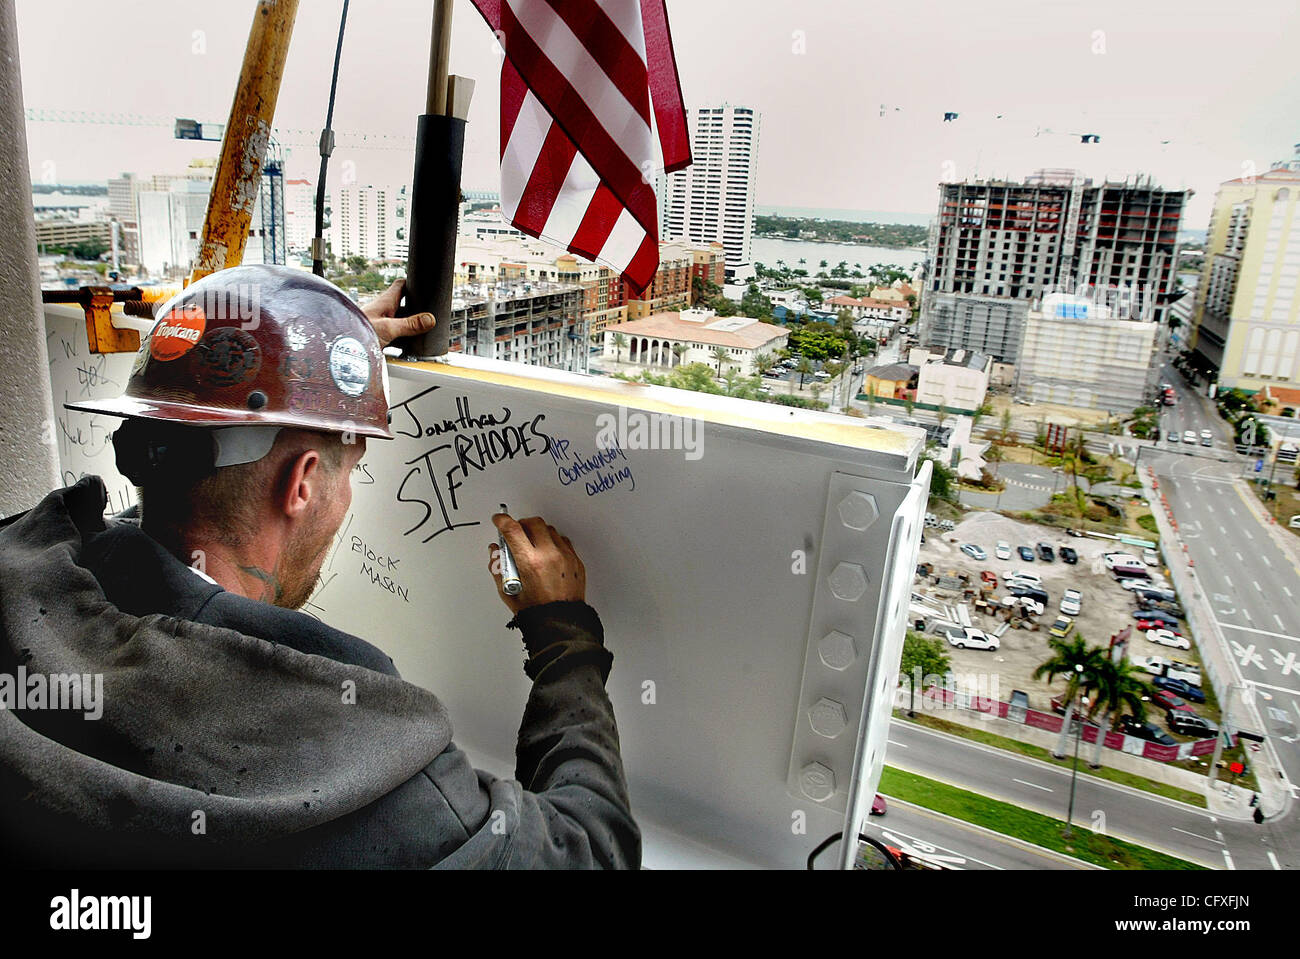 041207 met cityplace 2of5 -- Palm Beach Post staff photo by Taylor Jones/0036556A. WITH STORY? WEST PALM BEACH.  Jonathan Rhodes(cq), a steel fabricator from Port St. Lucie, signs a steel beam while on the 12th floor of CityPlace Tower, the first major office building in West Palm Beach to be constr Stock Photo